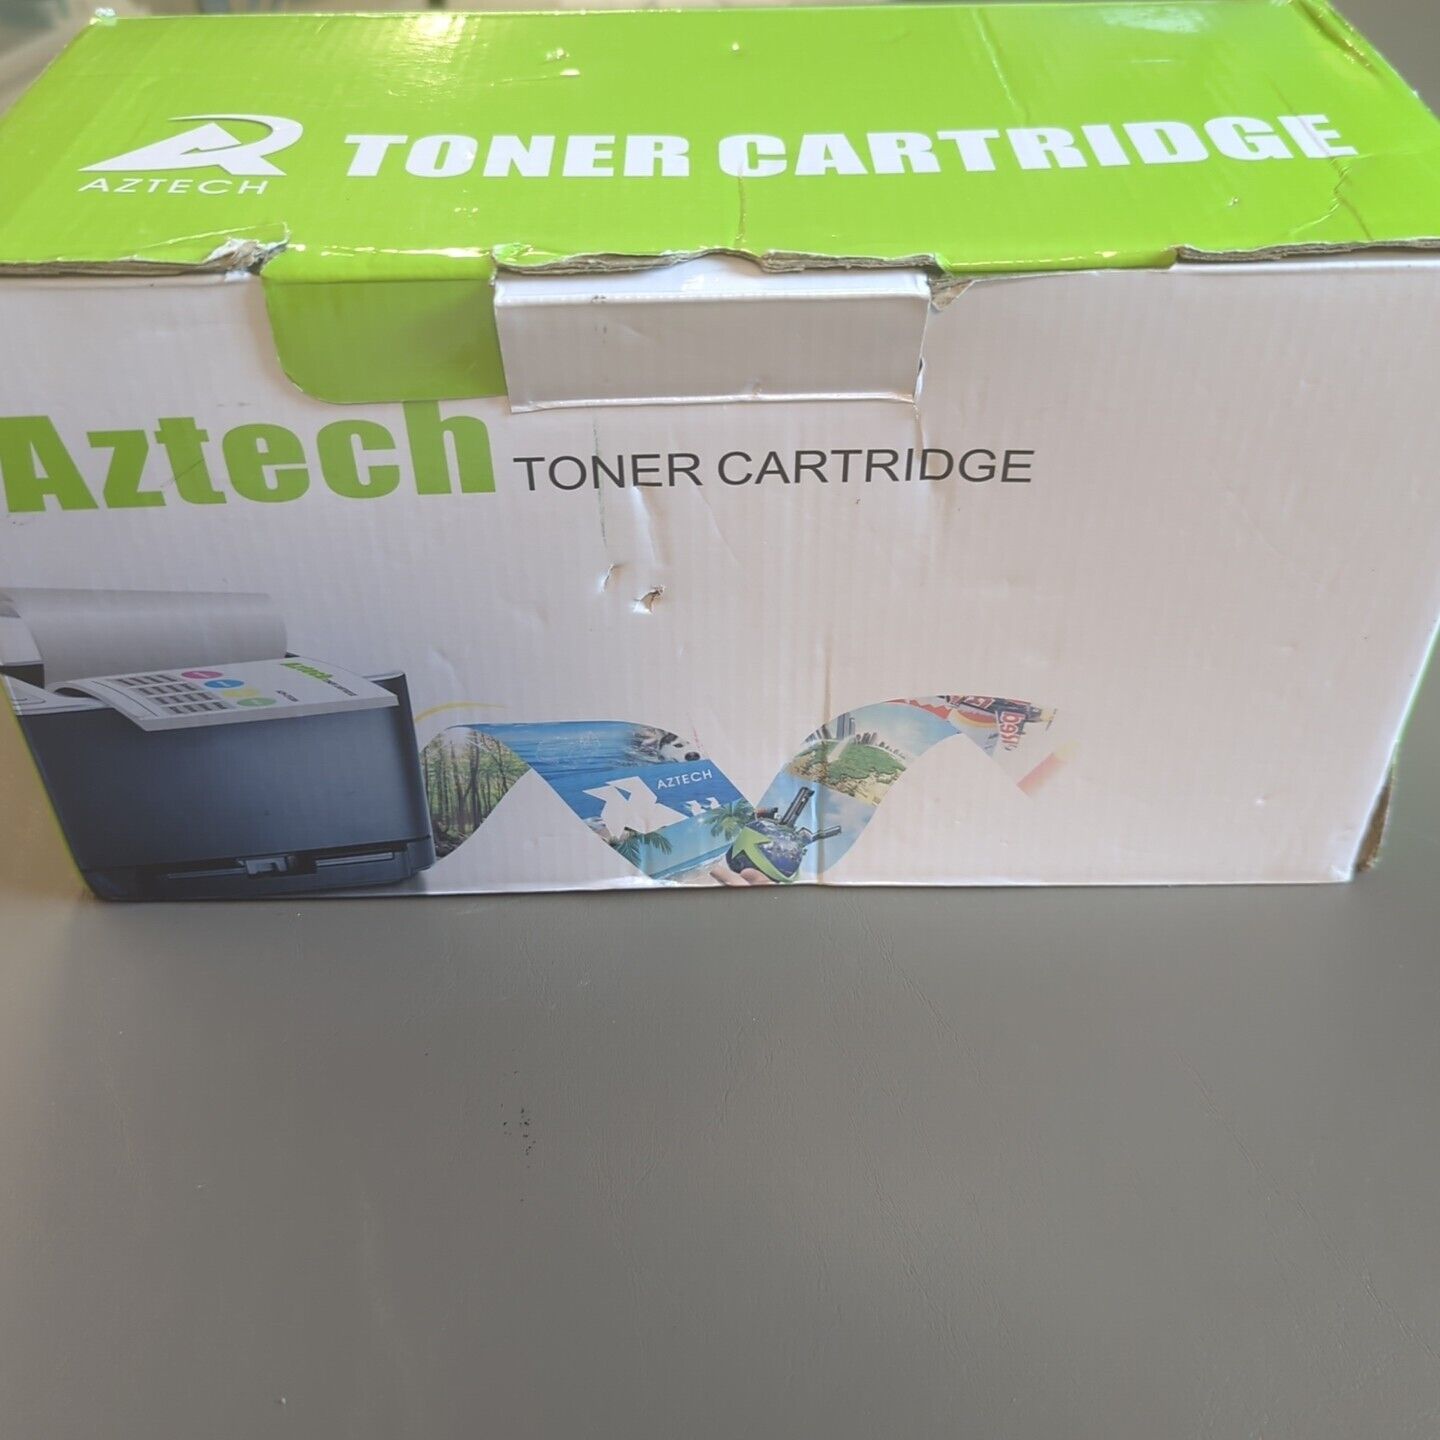 Aztech 26A (CF226A) Black Compatible Toner Cartridge - 2 Pack. New. Sealed